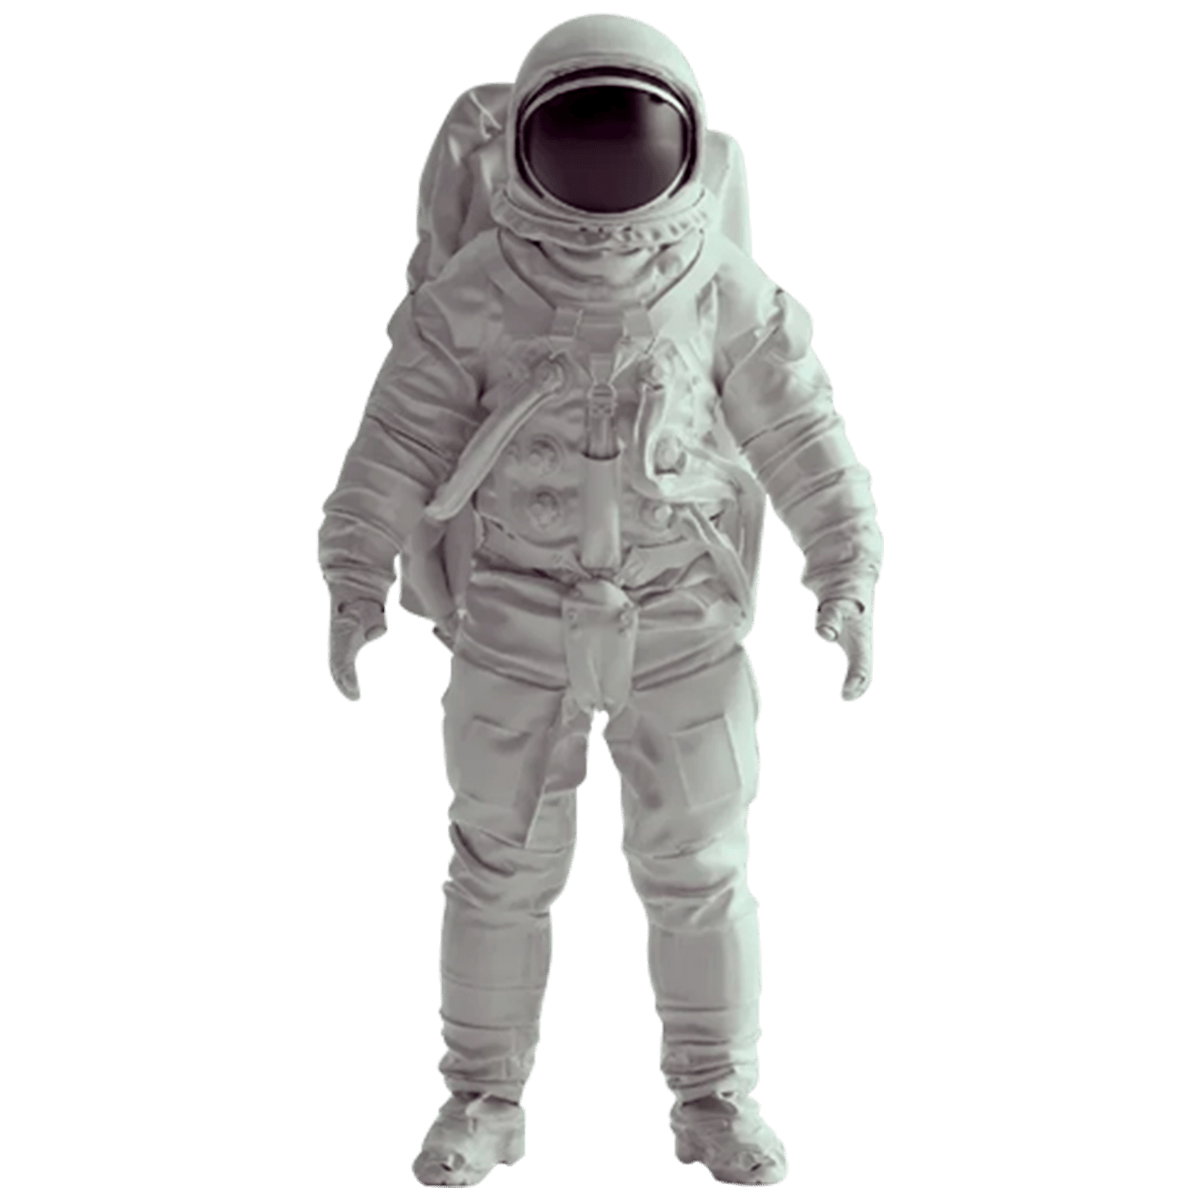 astronaut png trasnparent hd image free download